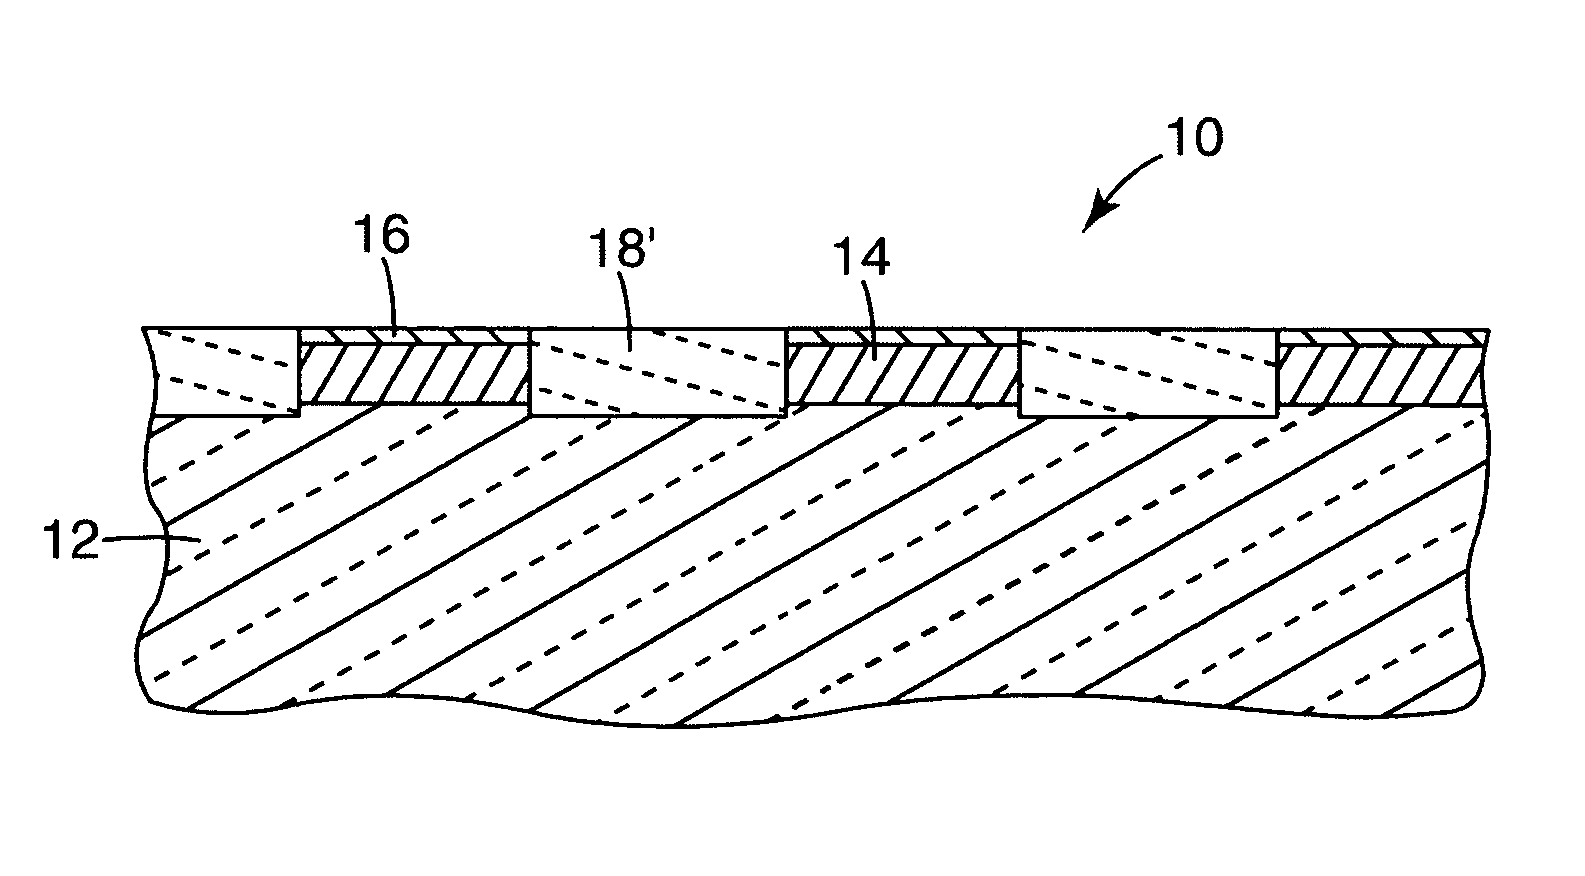 Wafer planarization composition and method of use